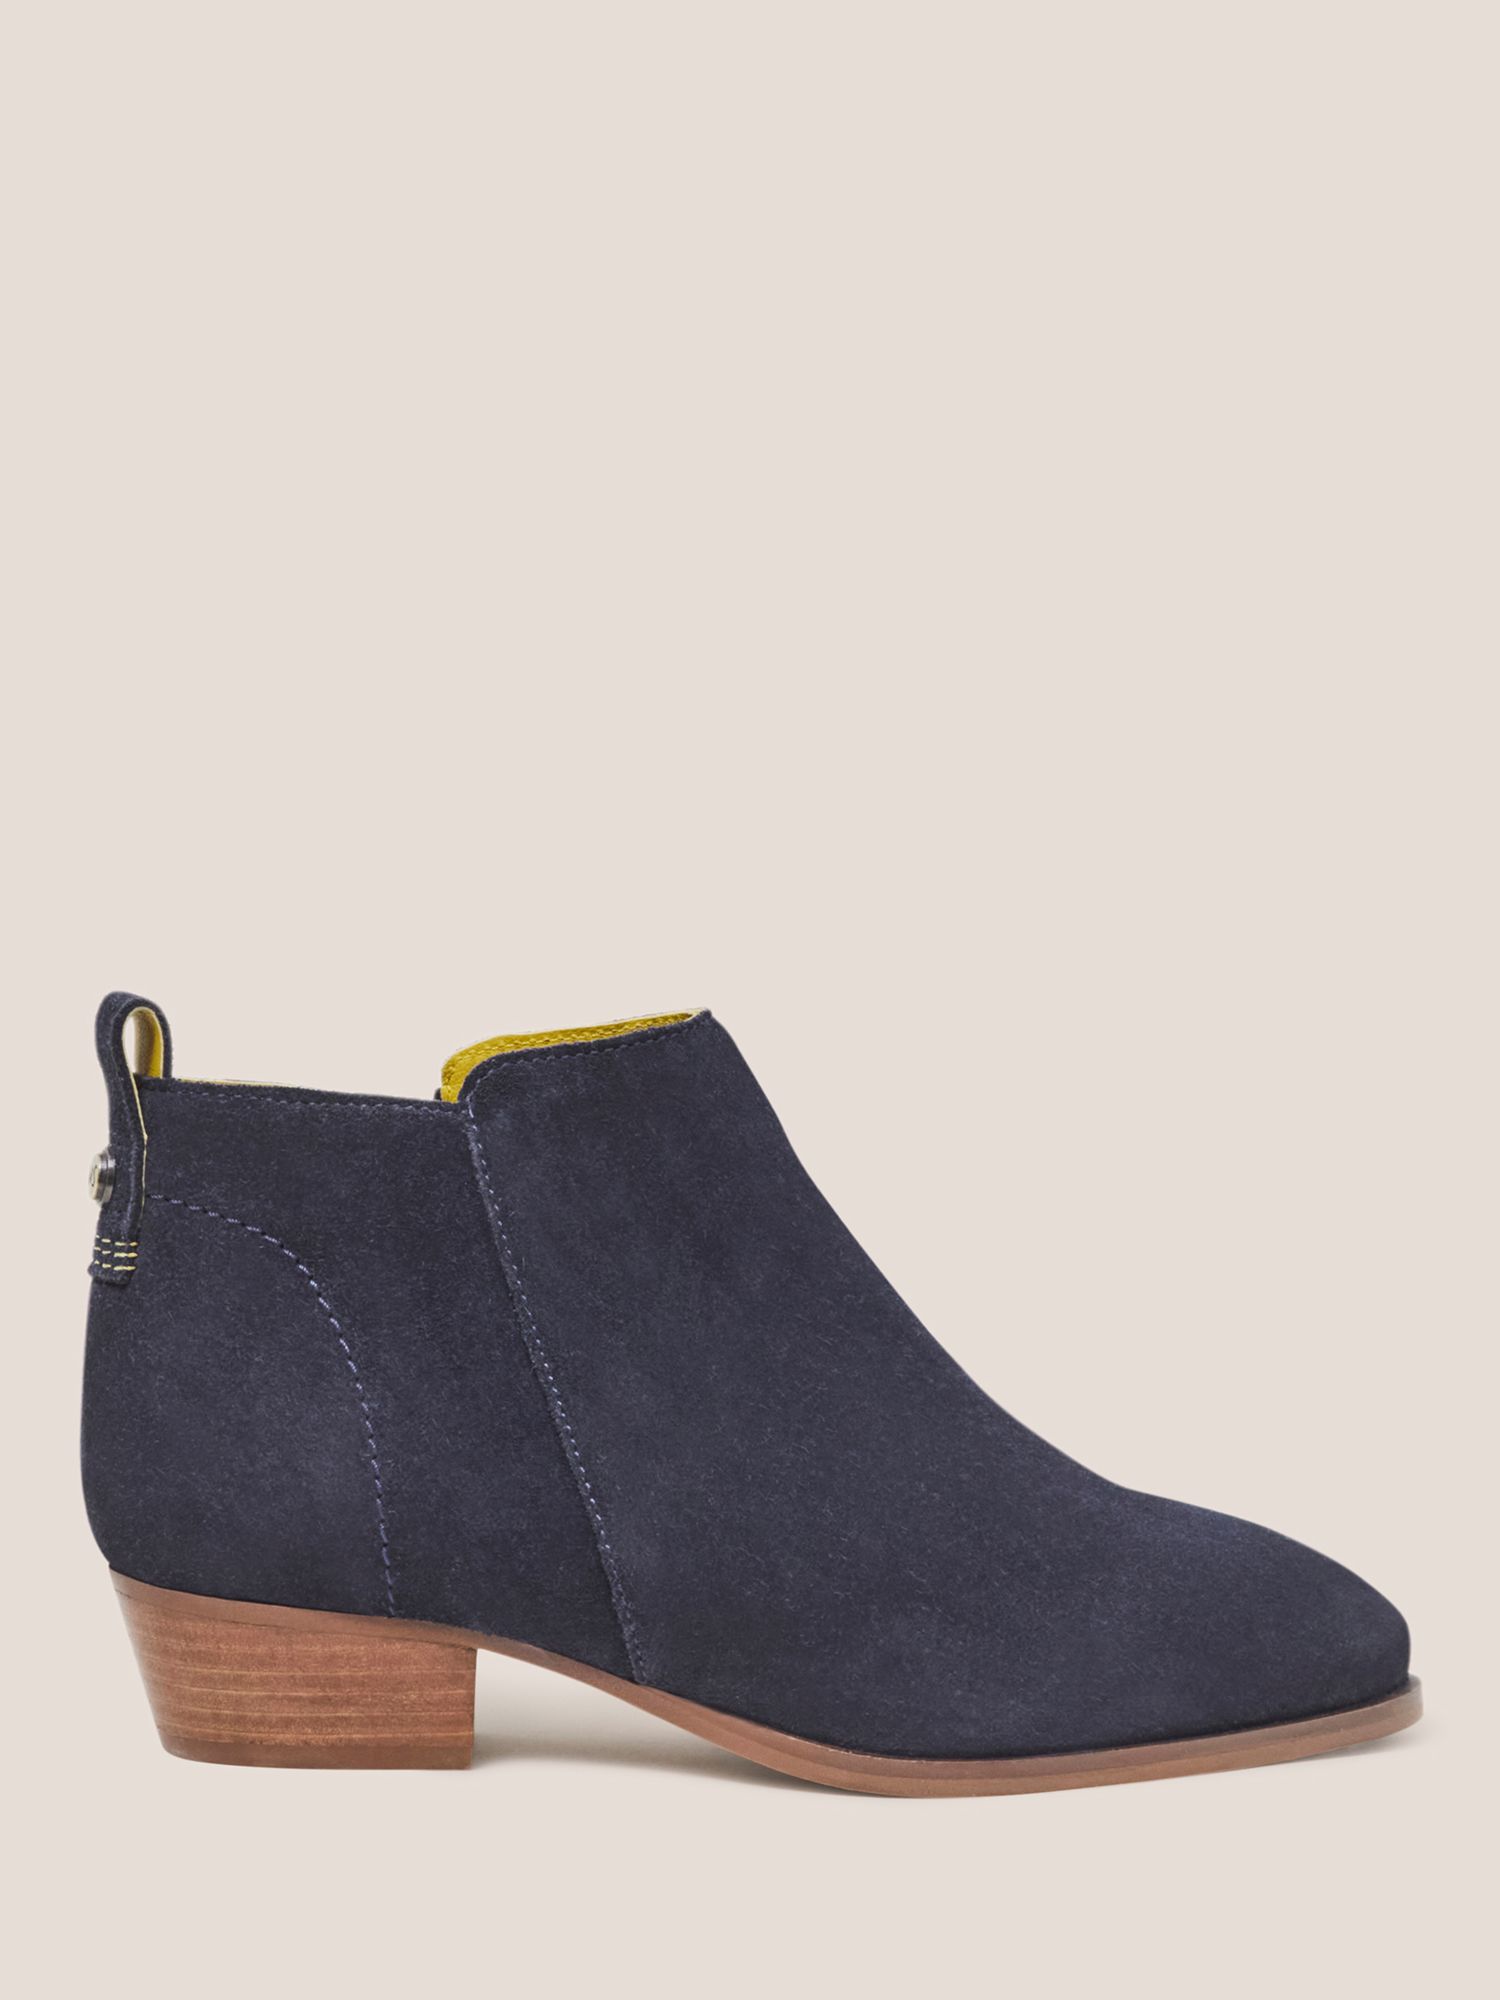 White Stuff Willow Suede Ankle Boots, Dark Navy at John Lewis & Partners